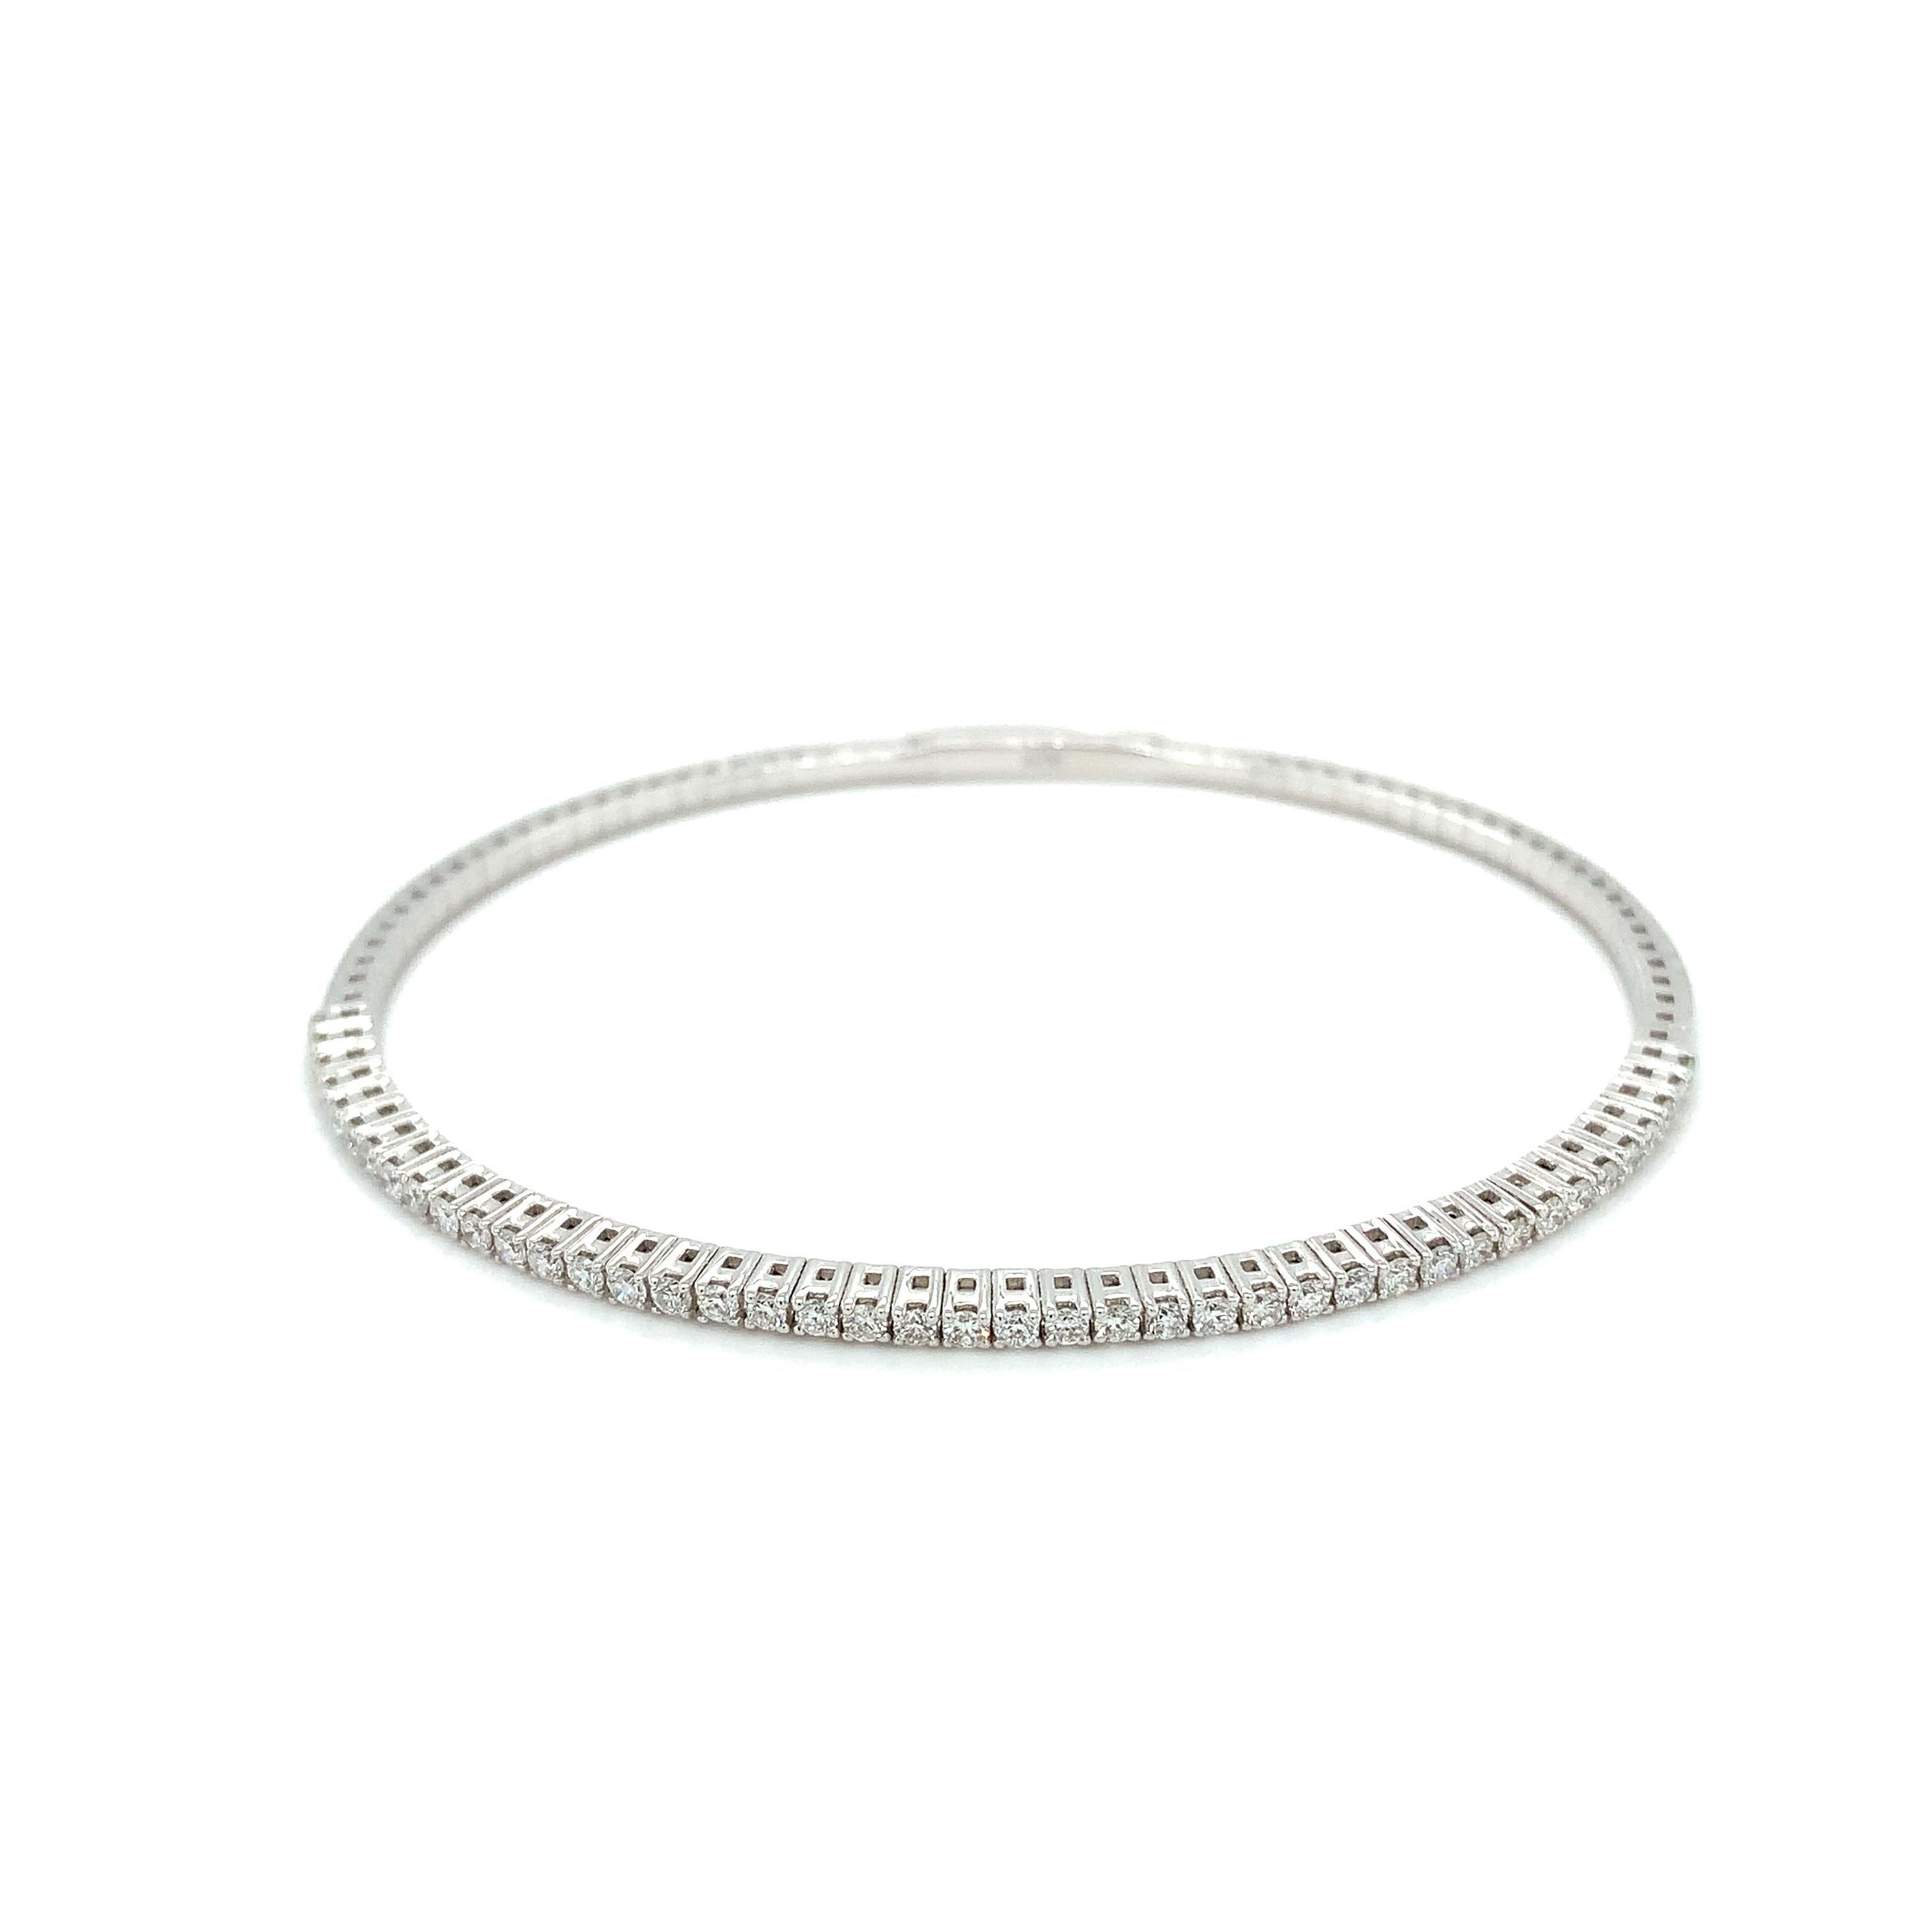 Diamond tennis bangle bracelet 18ct white gold In New Condition For Sale In London, GB